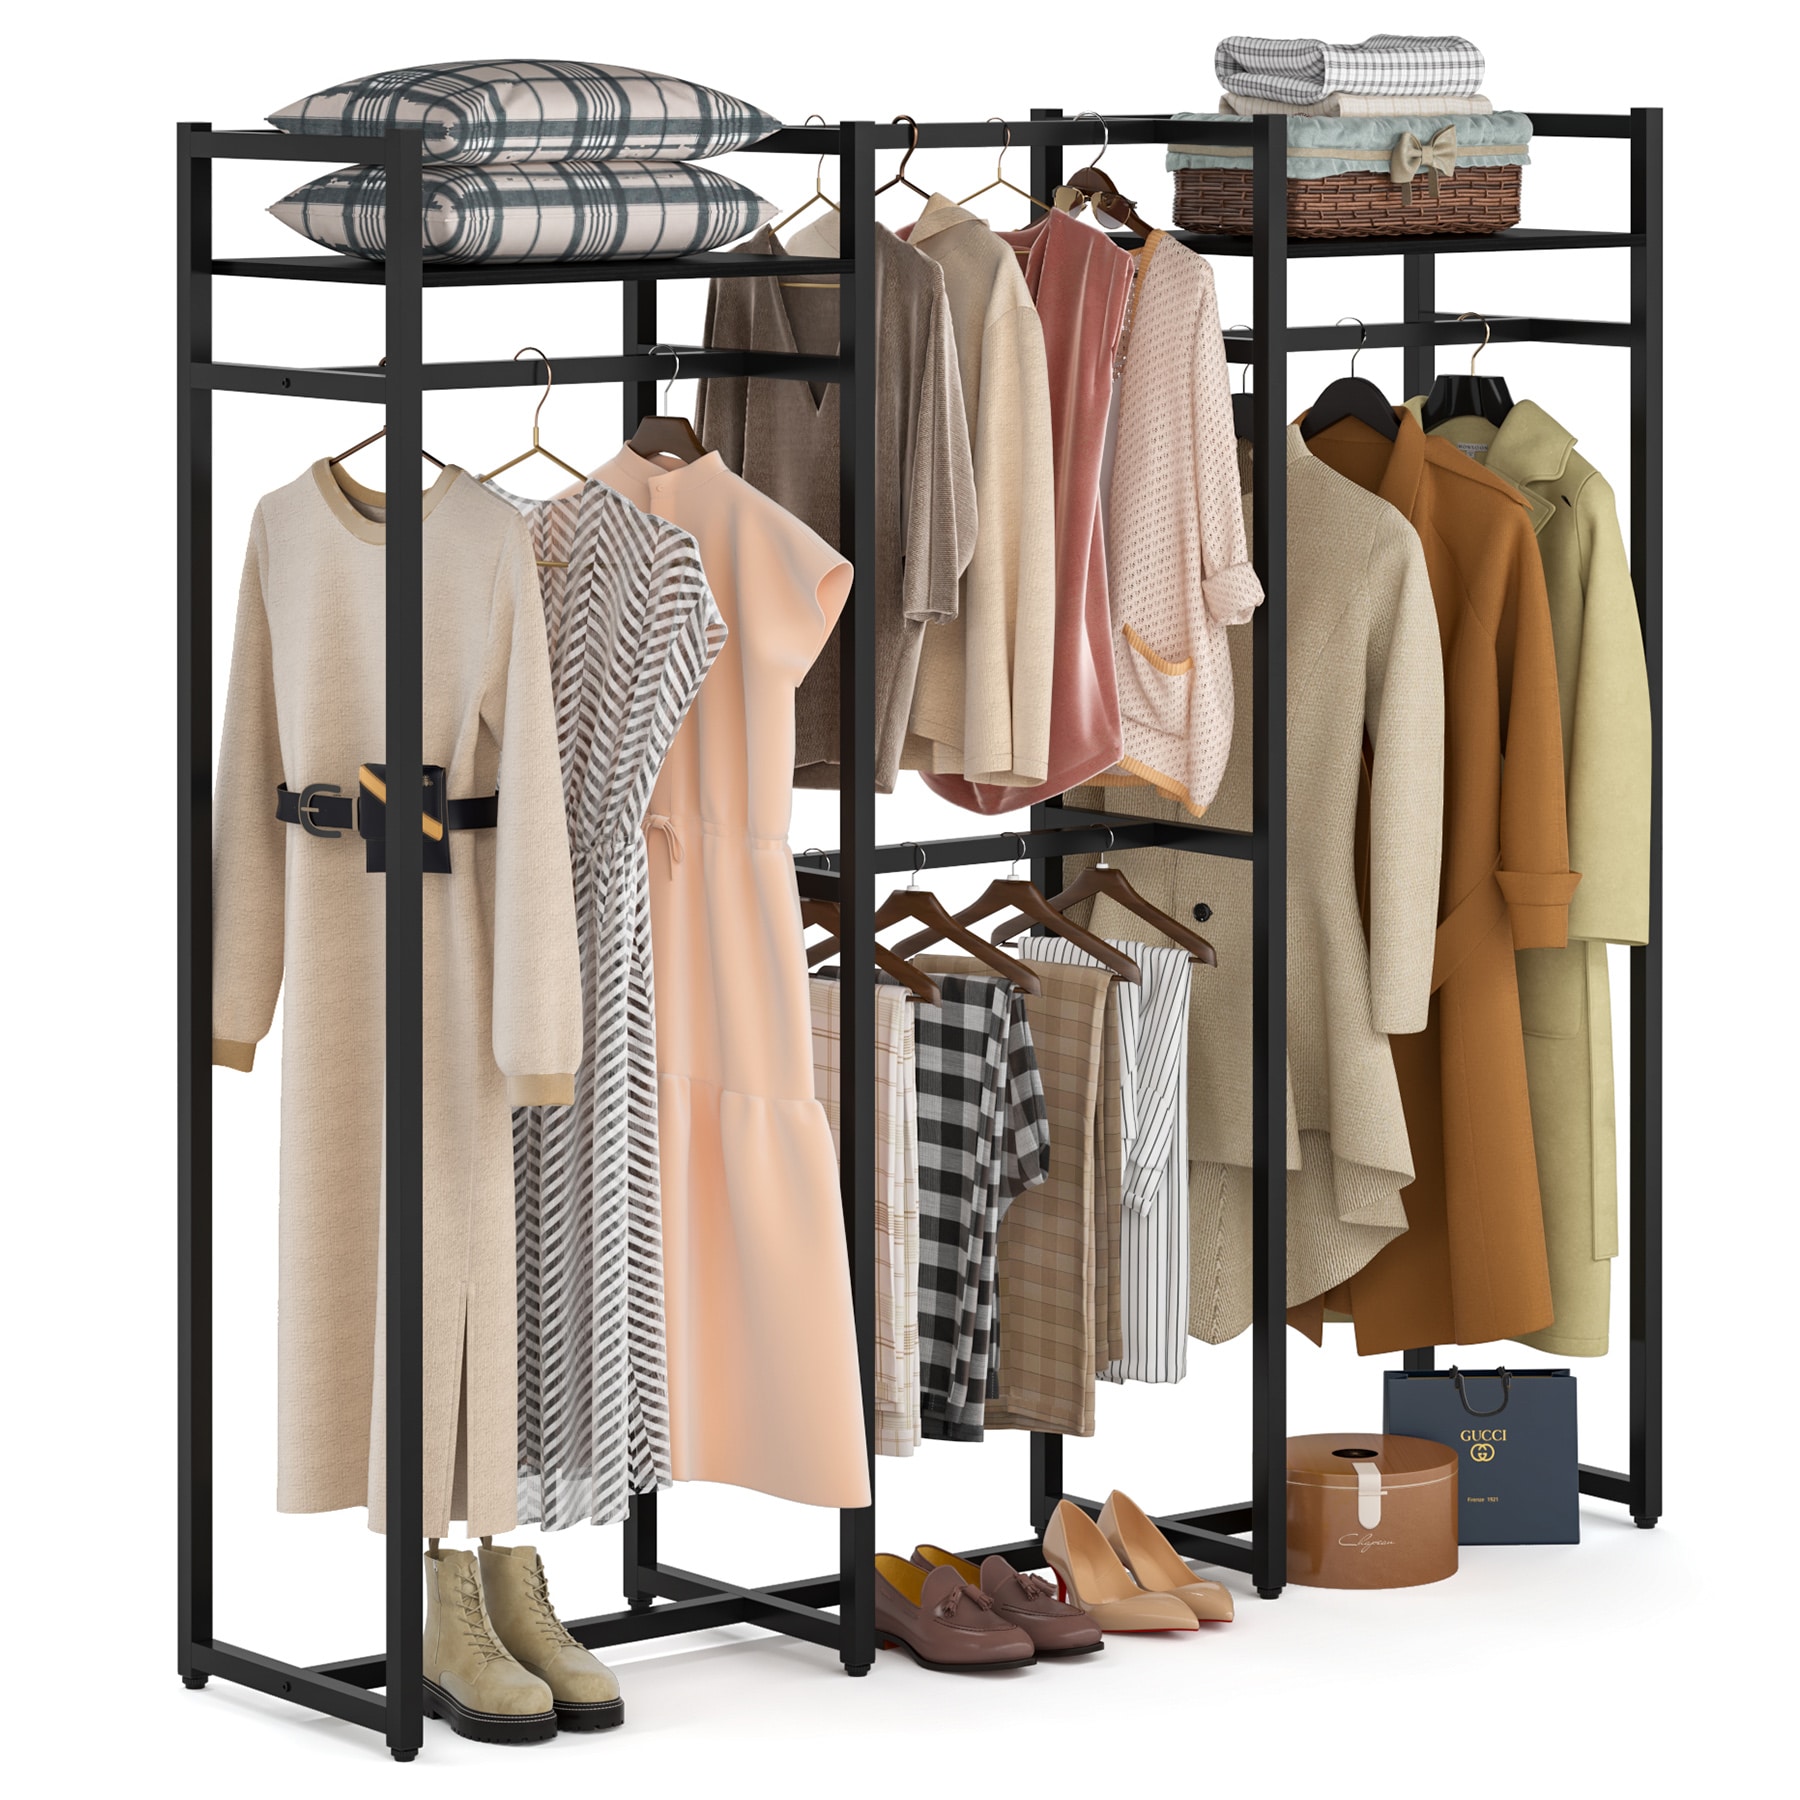 Tribesigns Free Standing Closet Organizer, Heavy Duty Clothes Garment Rack  with Shelves and Hanging Rod, Large Metal Closet Storage Organizer for